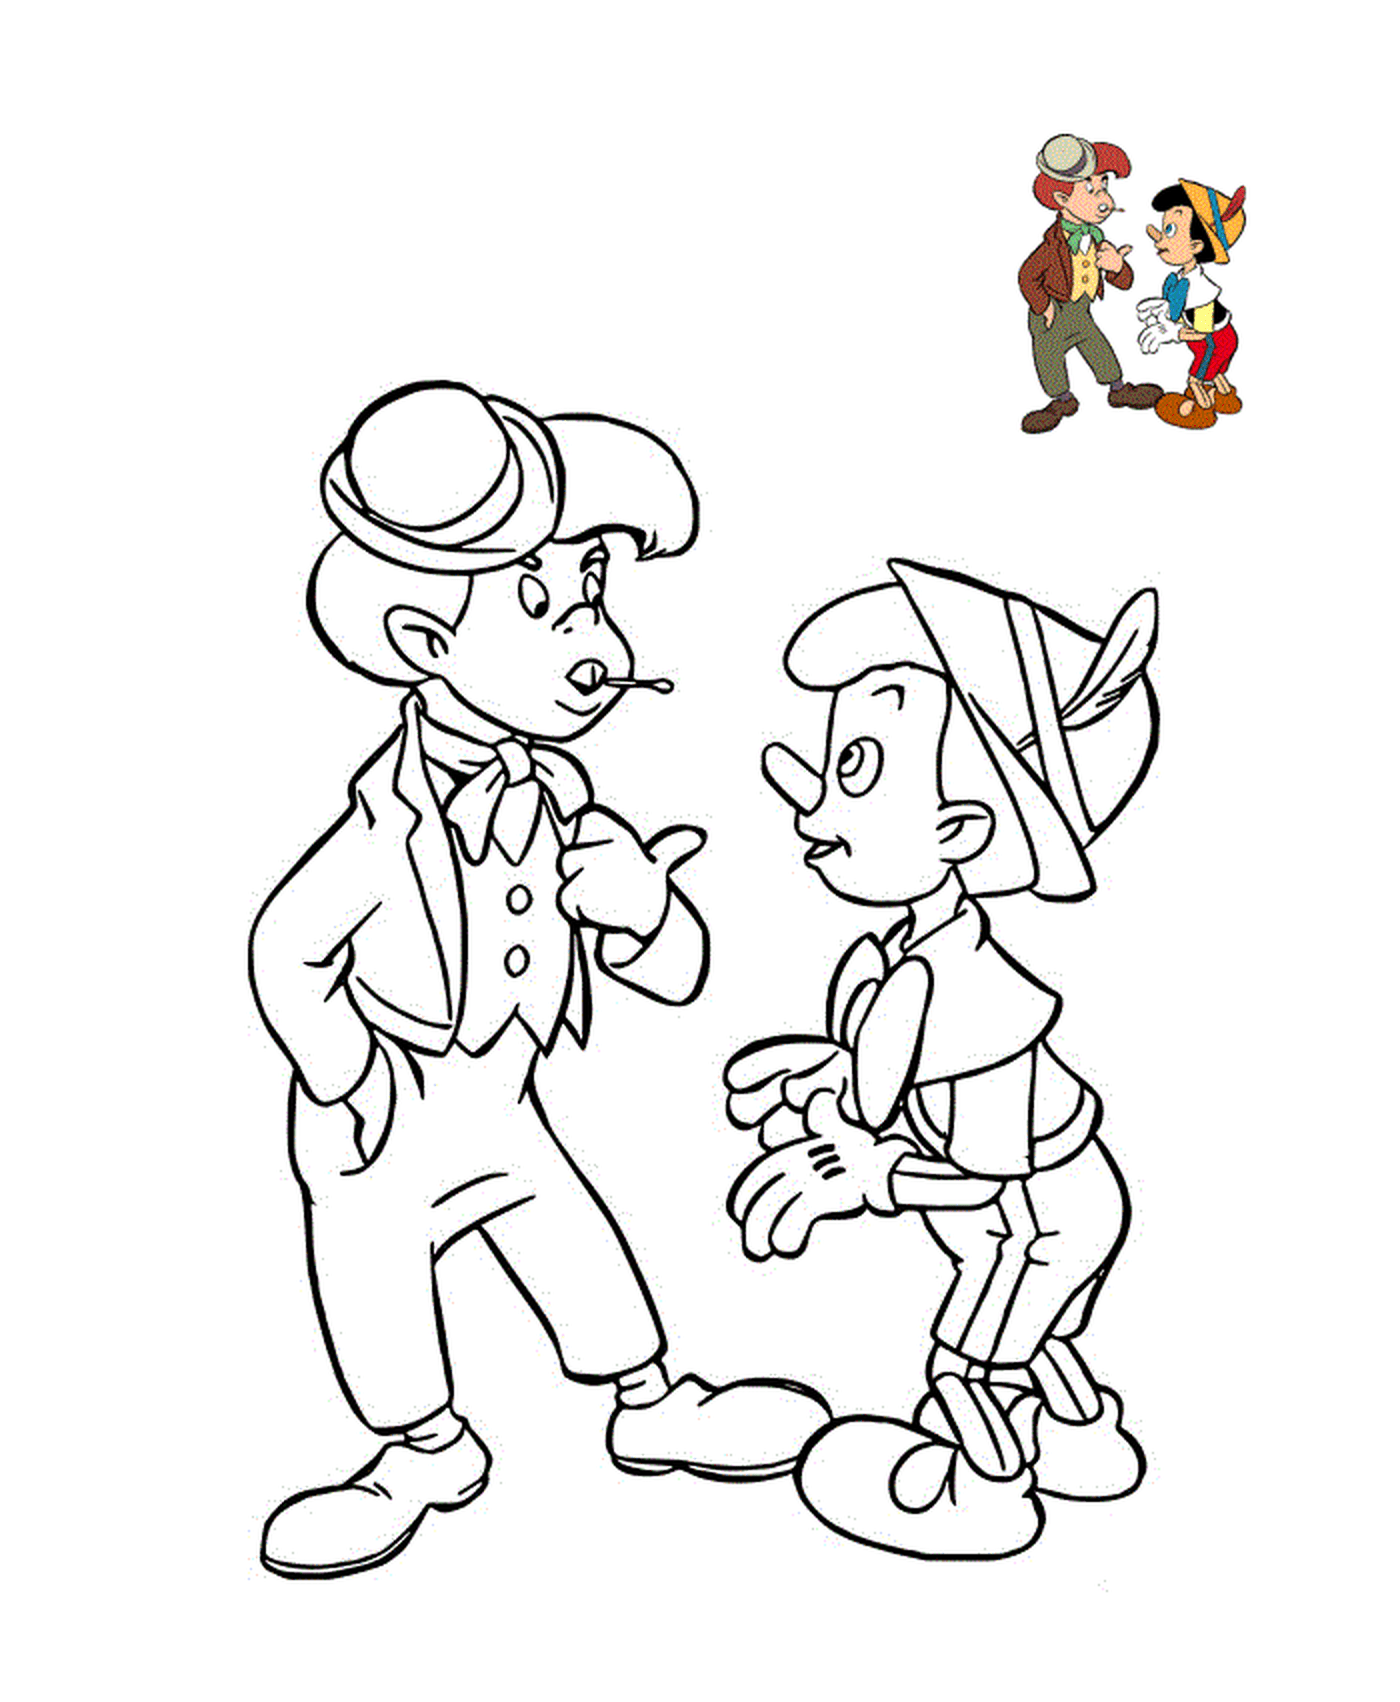  Pinocchio chats with Crapule 